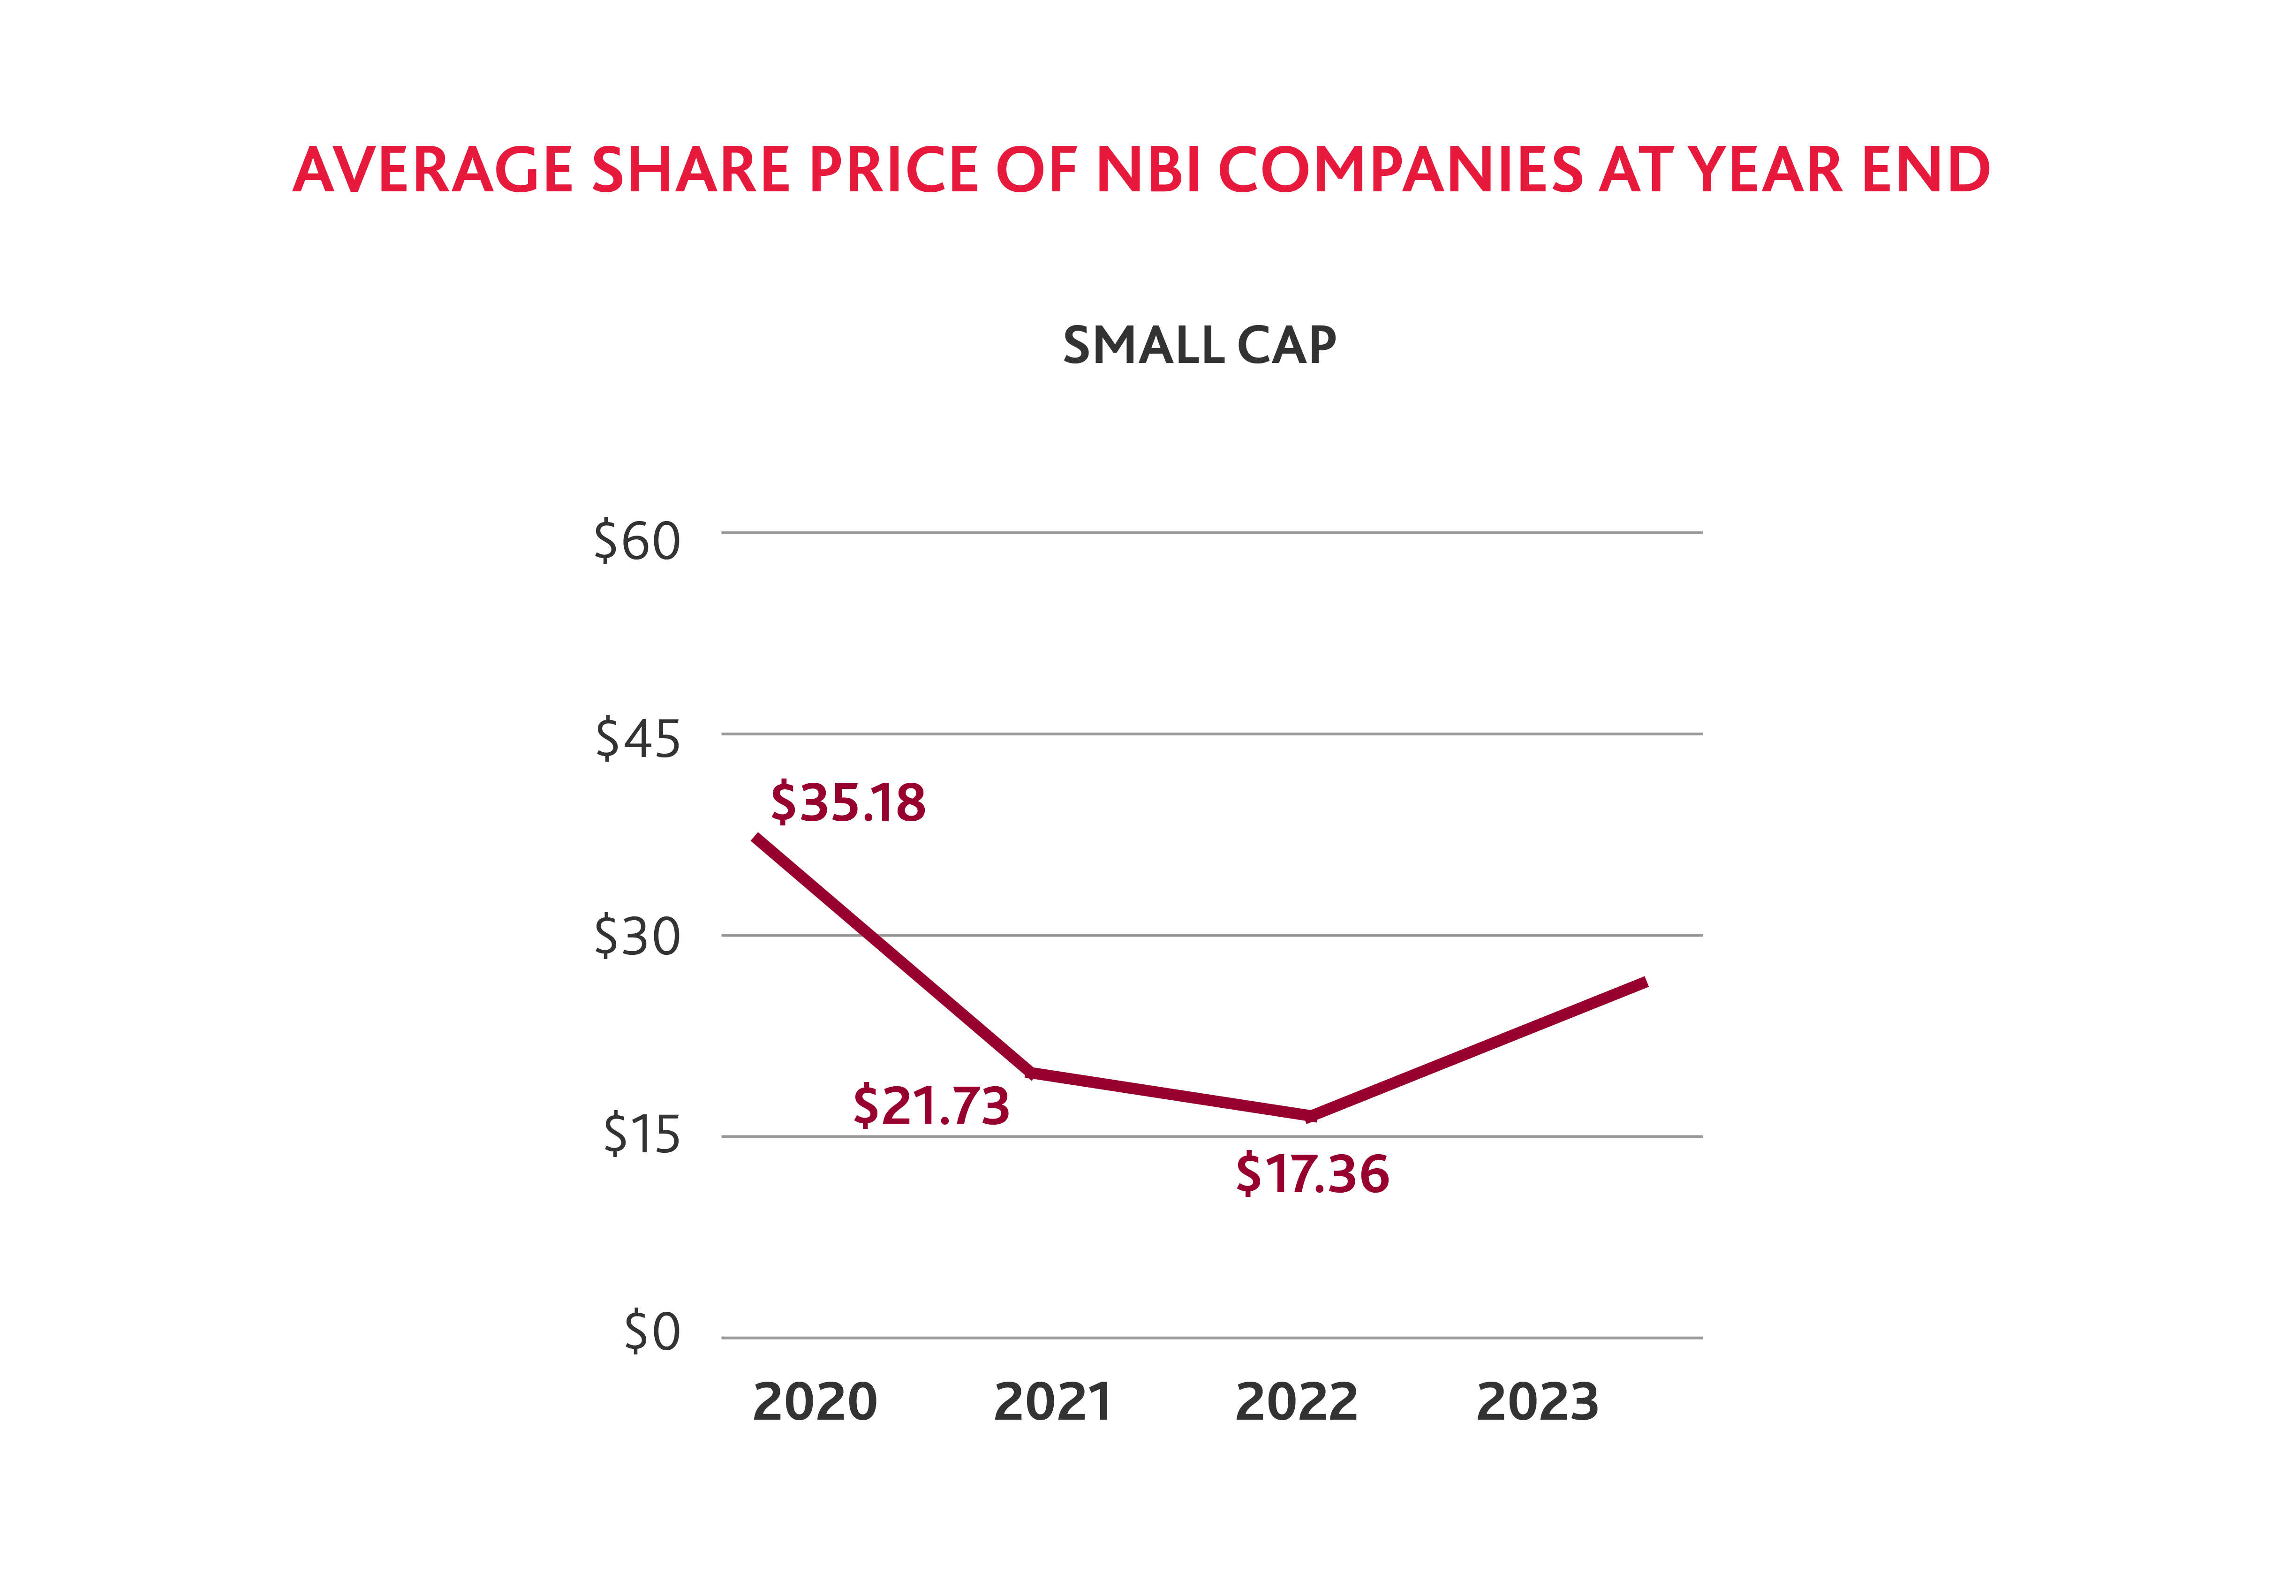 Chart showing average share price (small CAP) of NBI companies at year end from 2020 to 2023